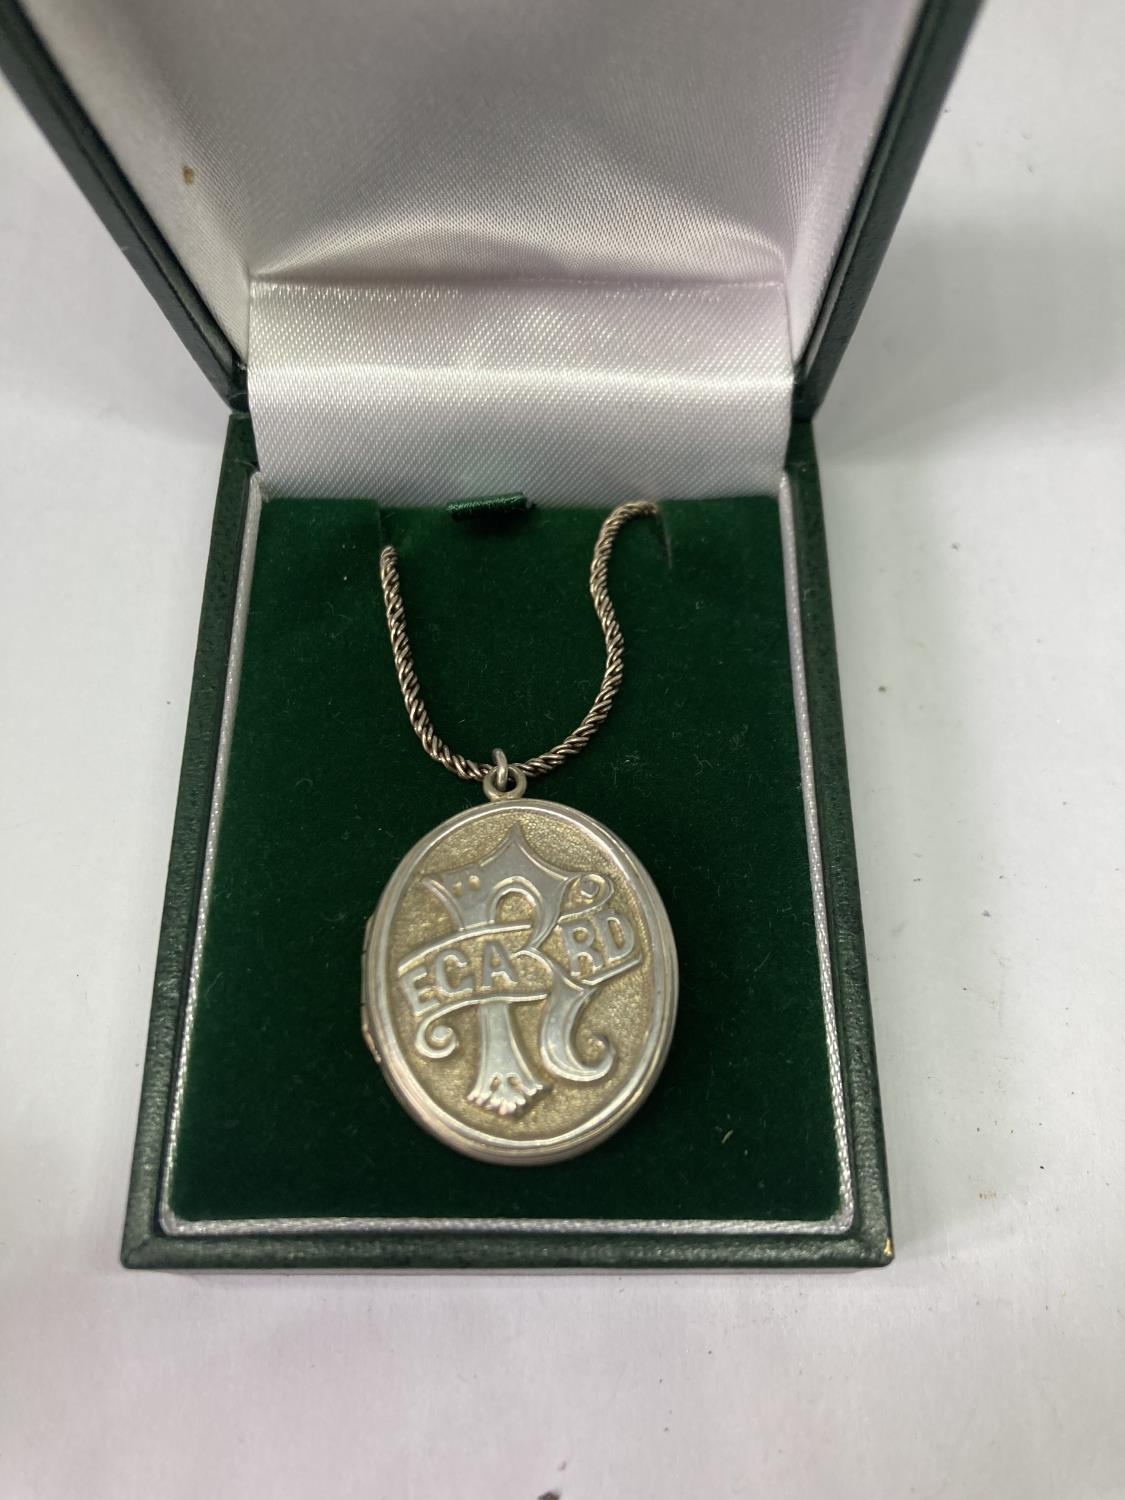 A SILVER NECKLACE AND LOCKET IN A PRESENTATION BOX